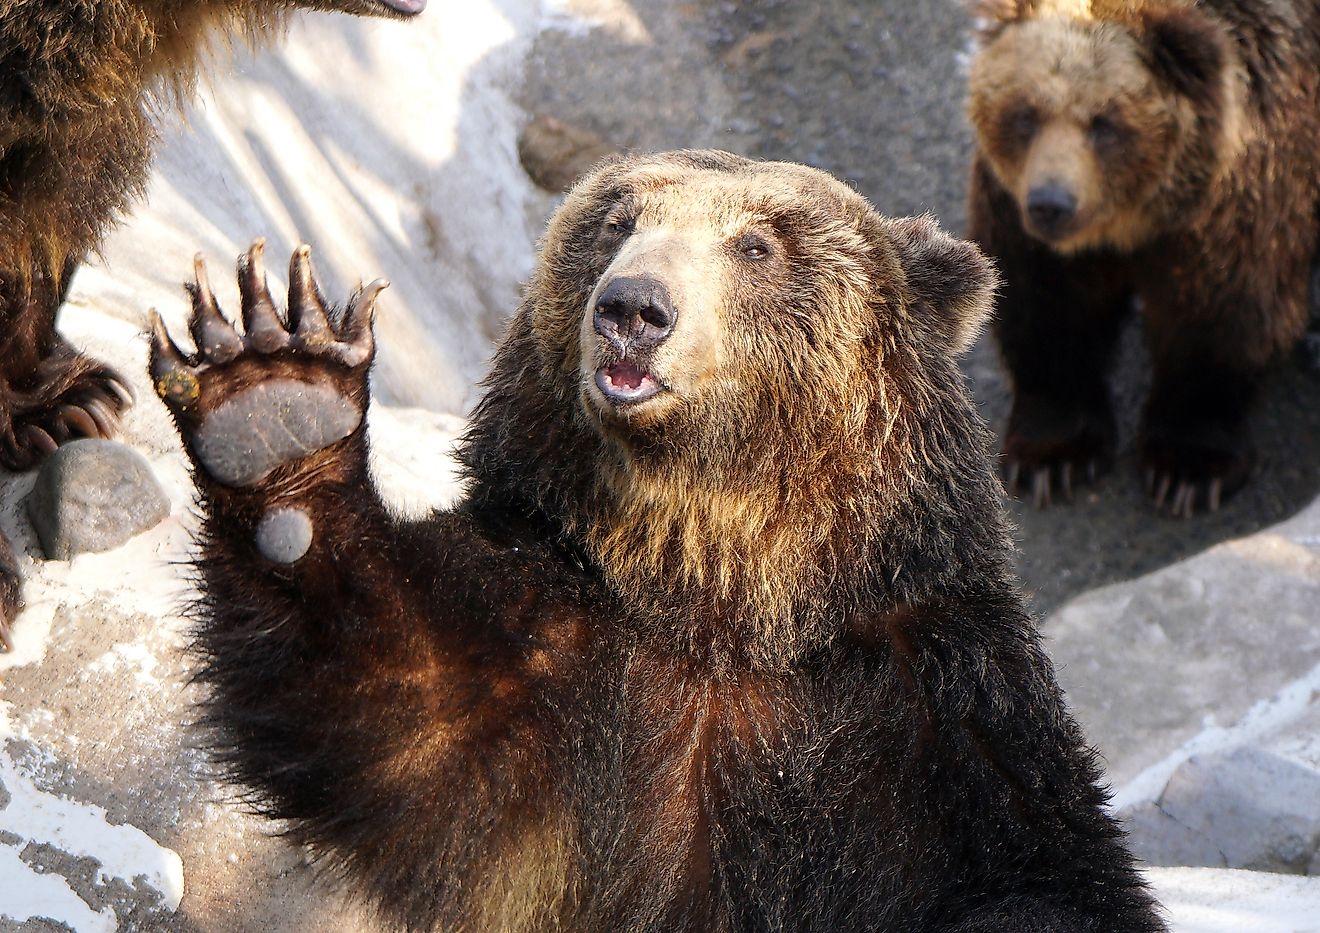 An Ussuri brown bear in a bear ranch in Hokkaido waves its paw at visitors which it sees carrying a bag of food. Image credit: Vanessa/Shutterstock.com